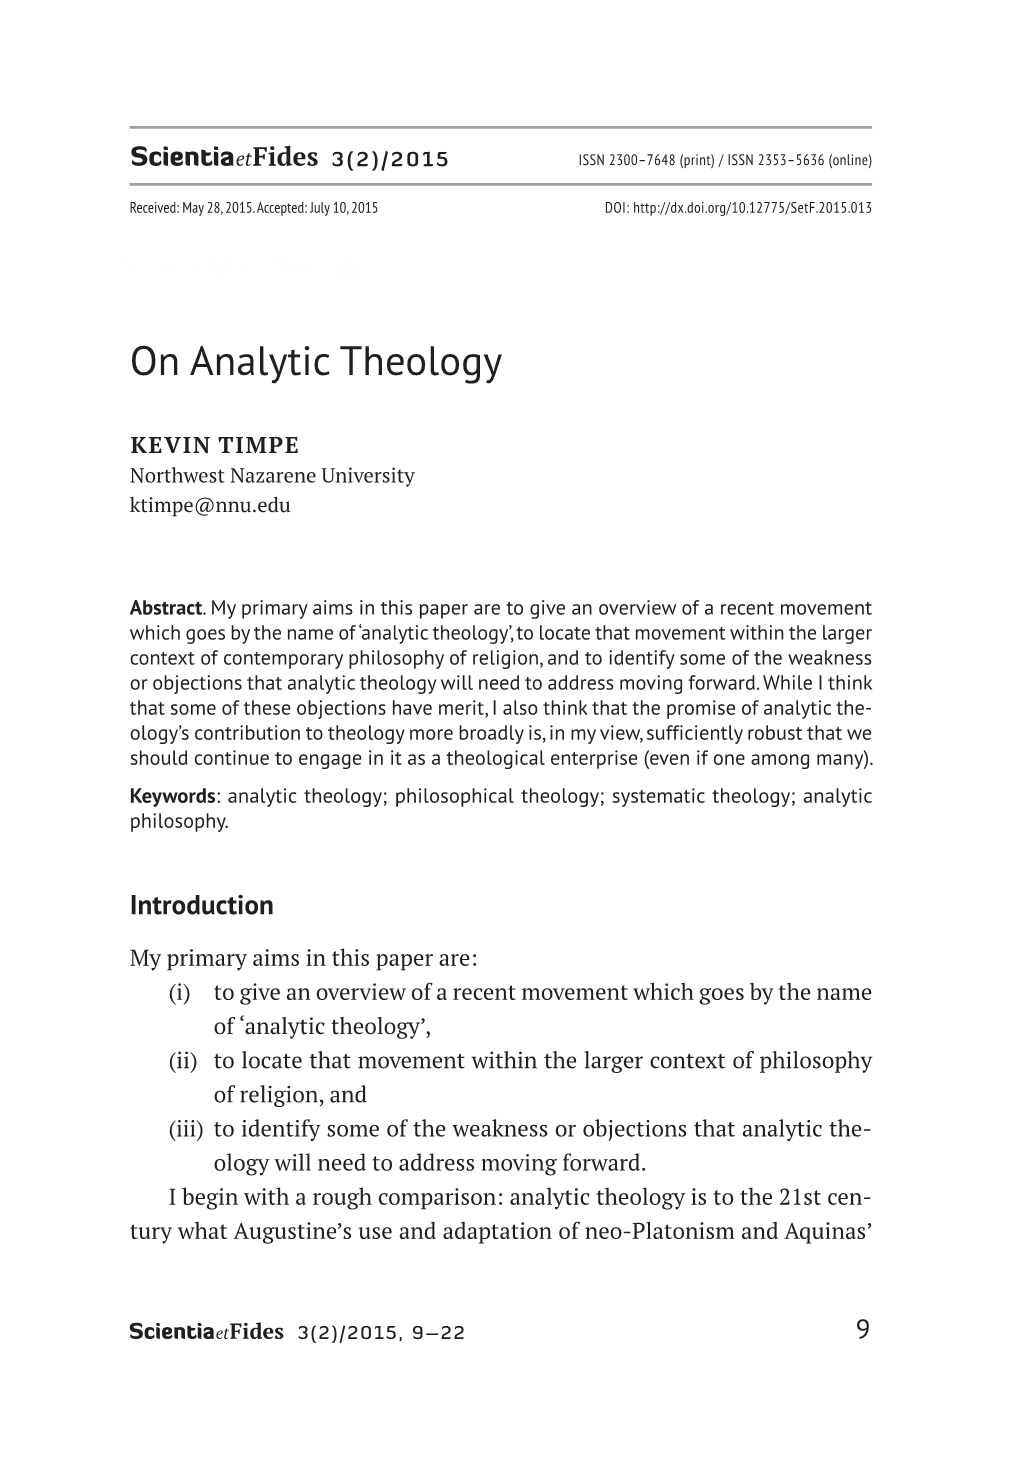 On Analytic Theology